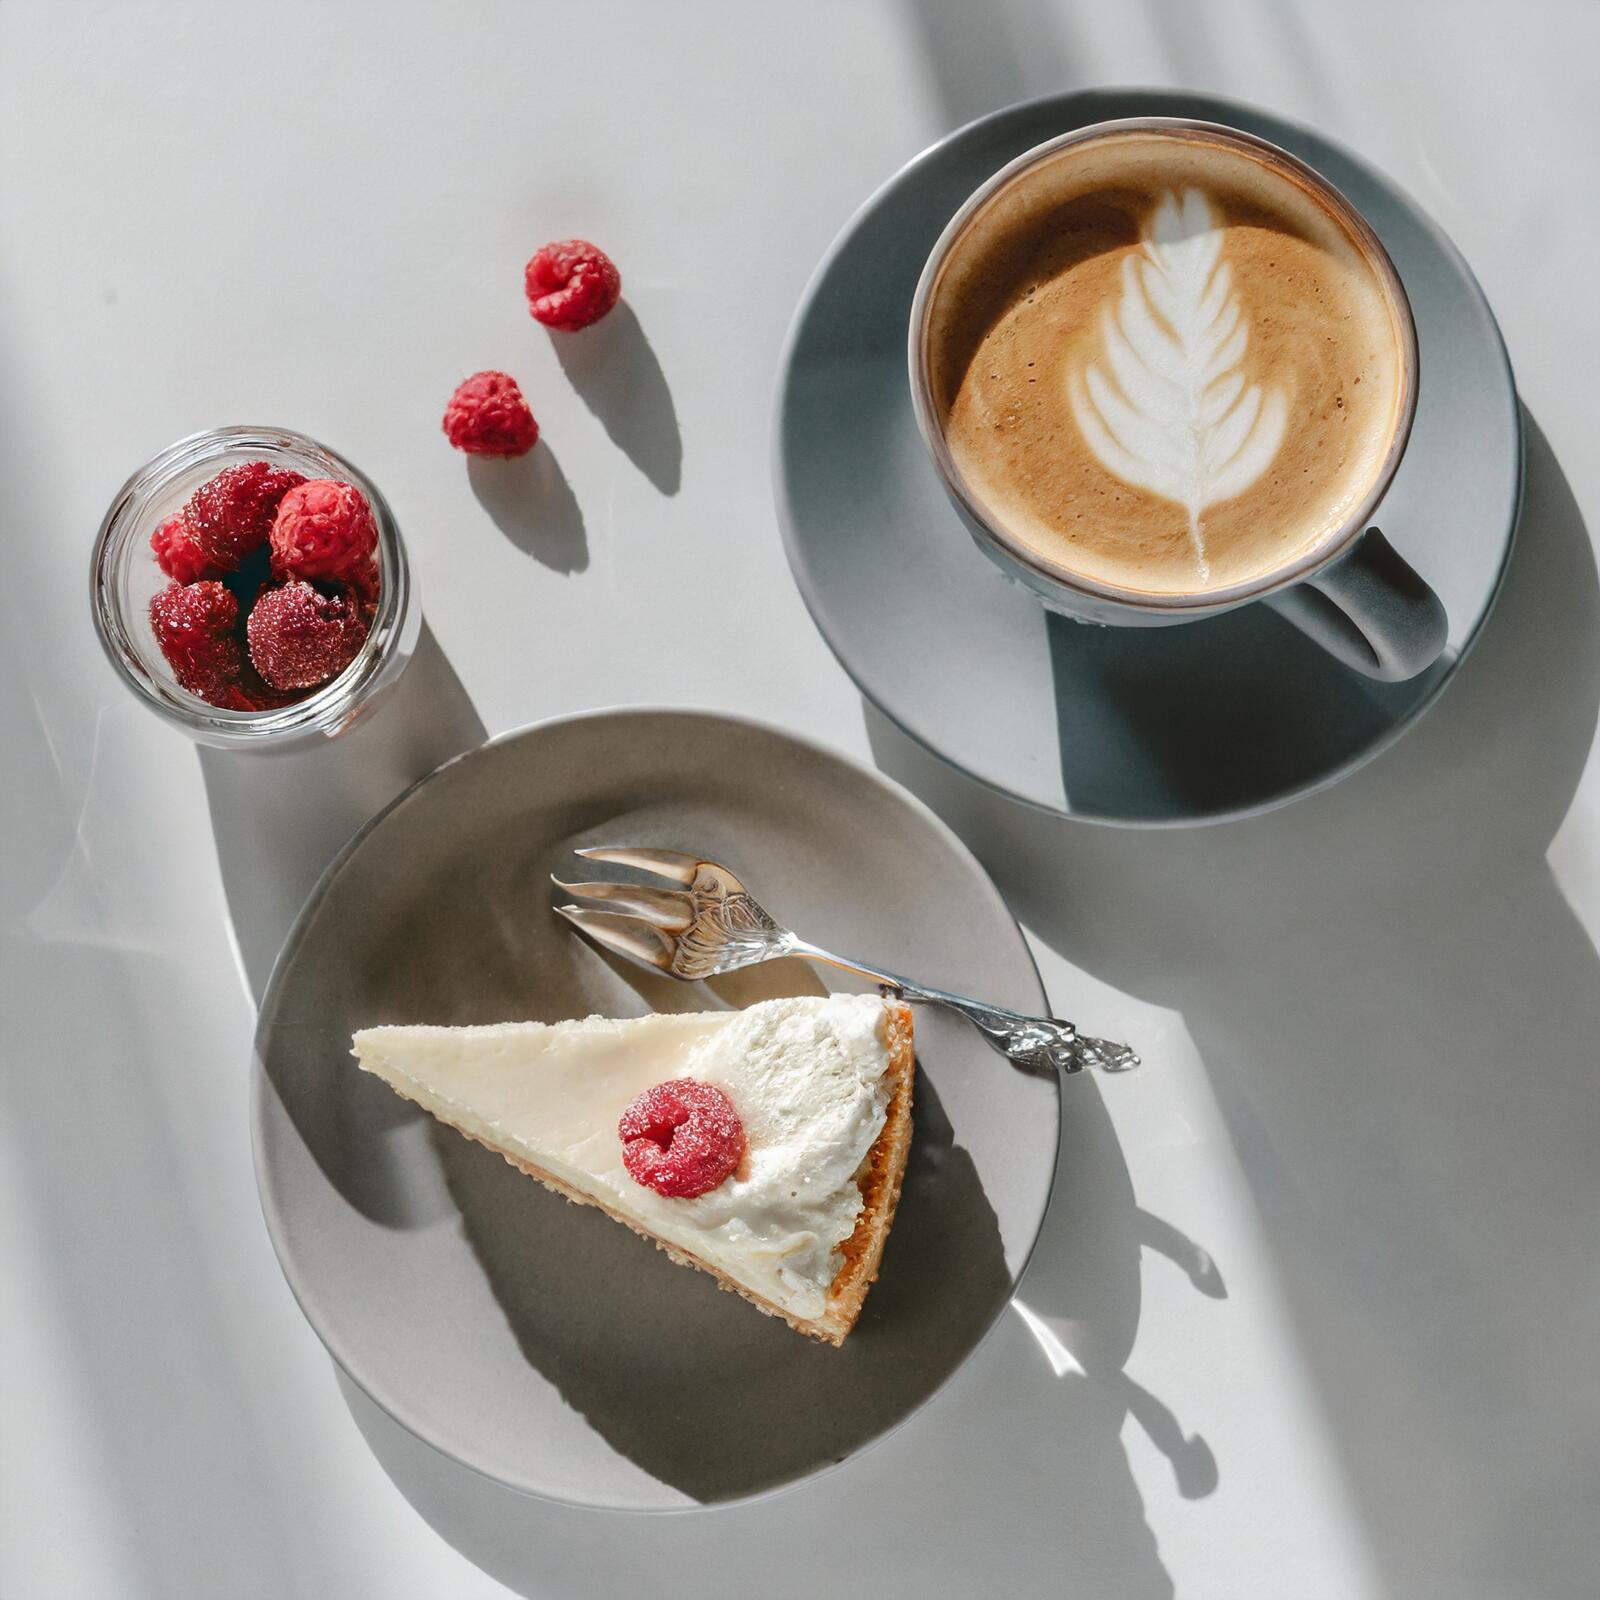 Free photo A white coffee cup next to a plate with a slice of cake on it